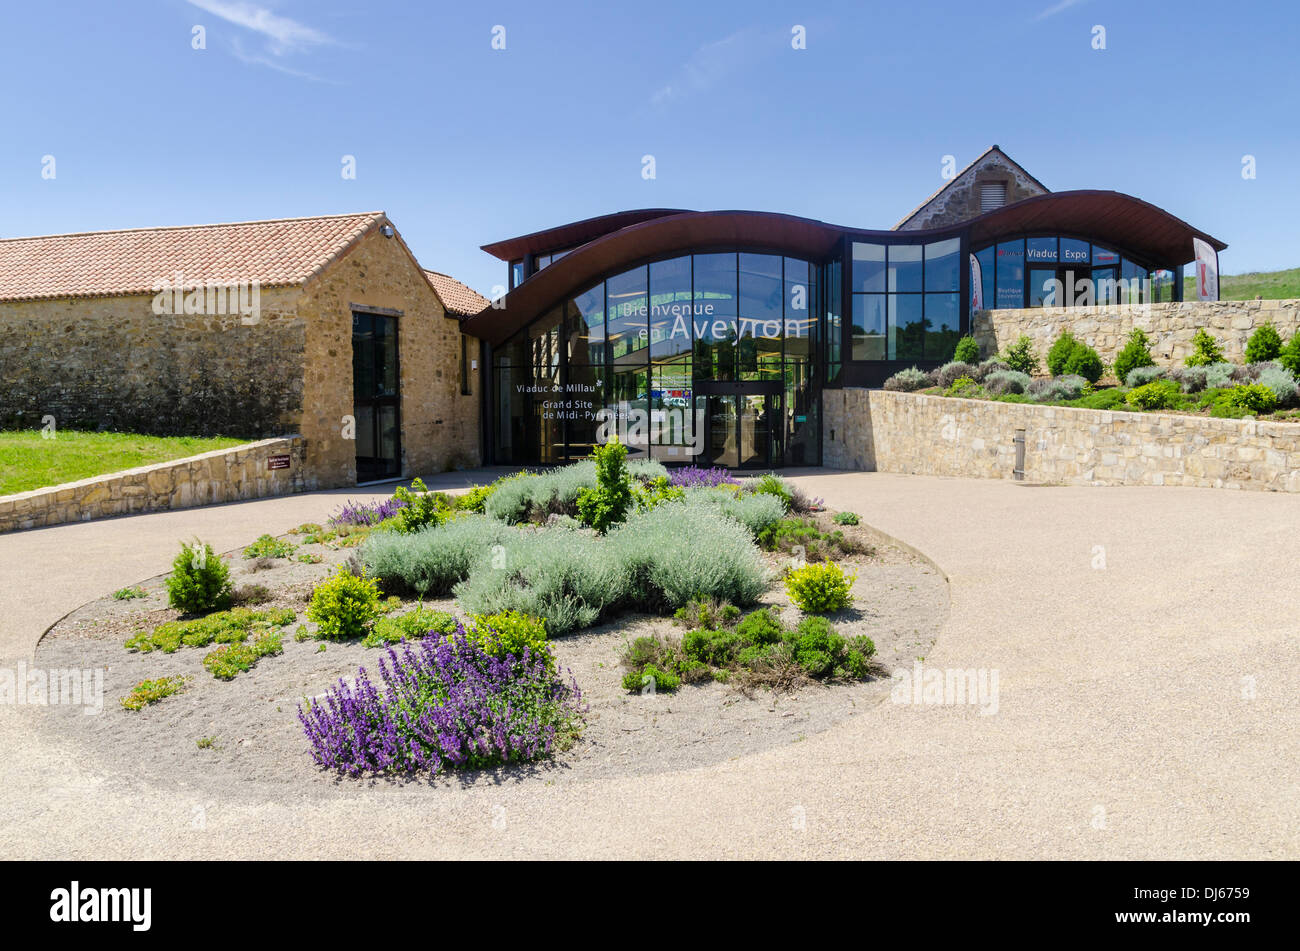 Aveyron visitor centre in the rest area of Brocuejouls and at the Millau Viaduct, near the town of Millau in southern France Stock Photo